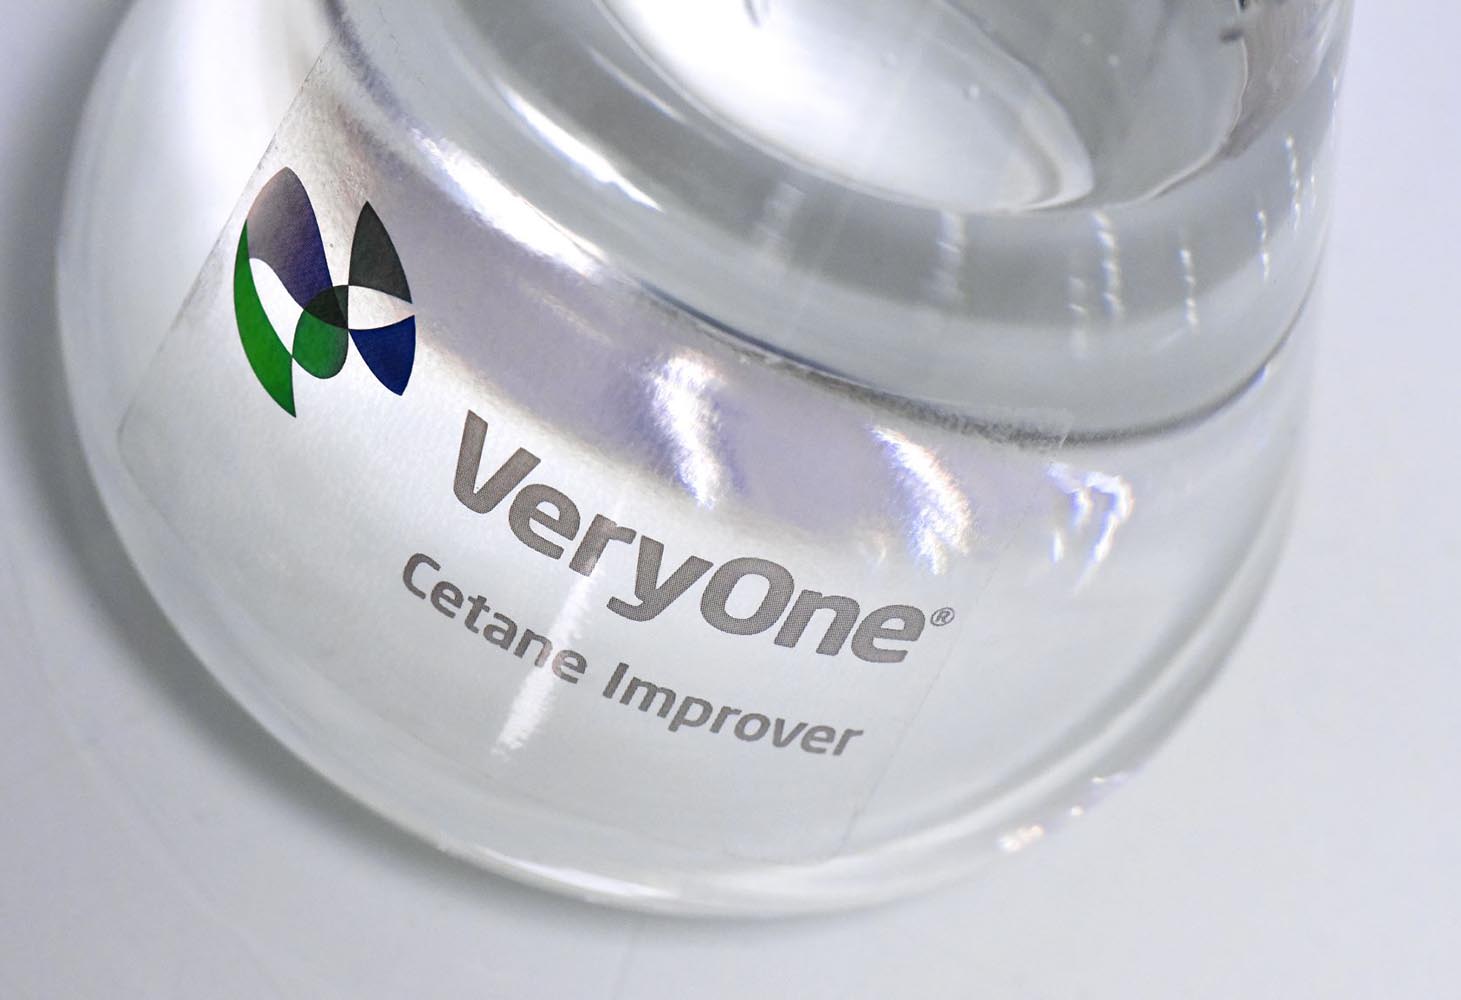 VeryOne acquires EPC's cetane improver production facility in UK